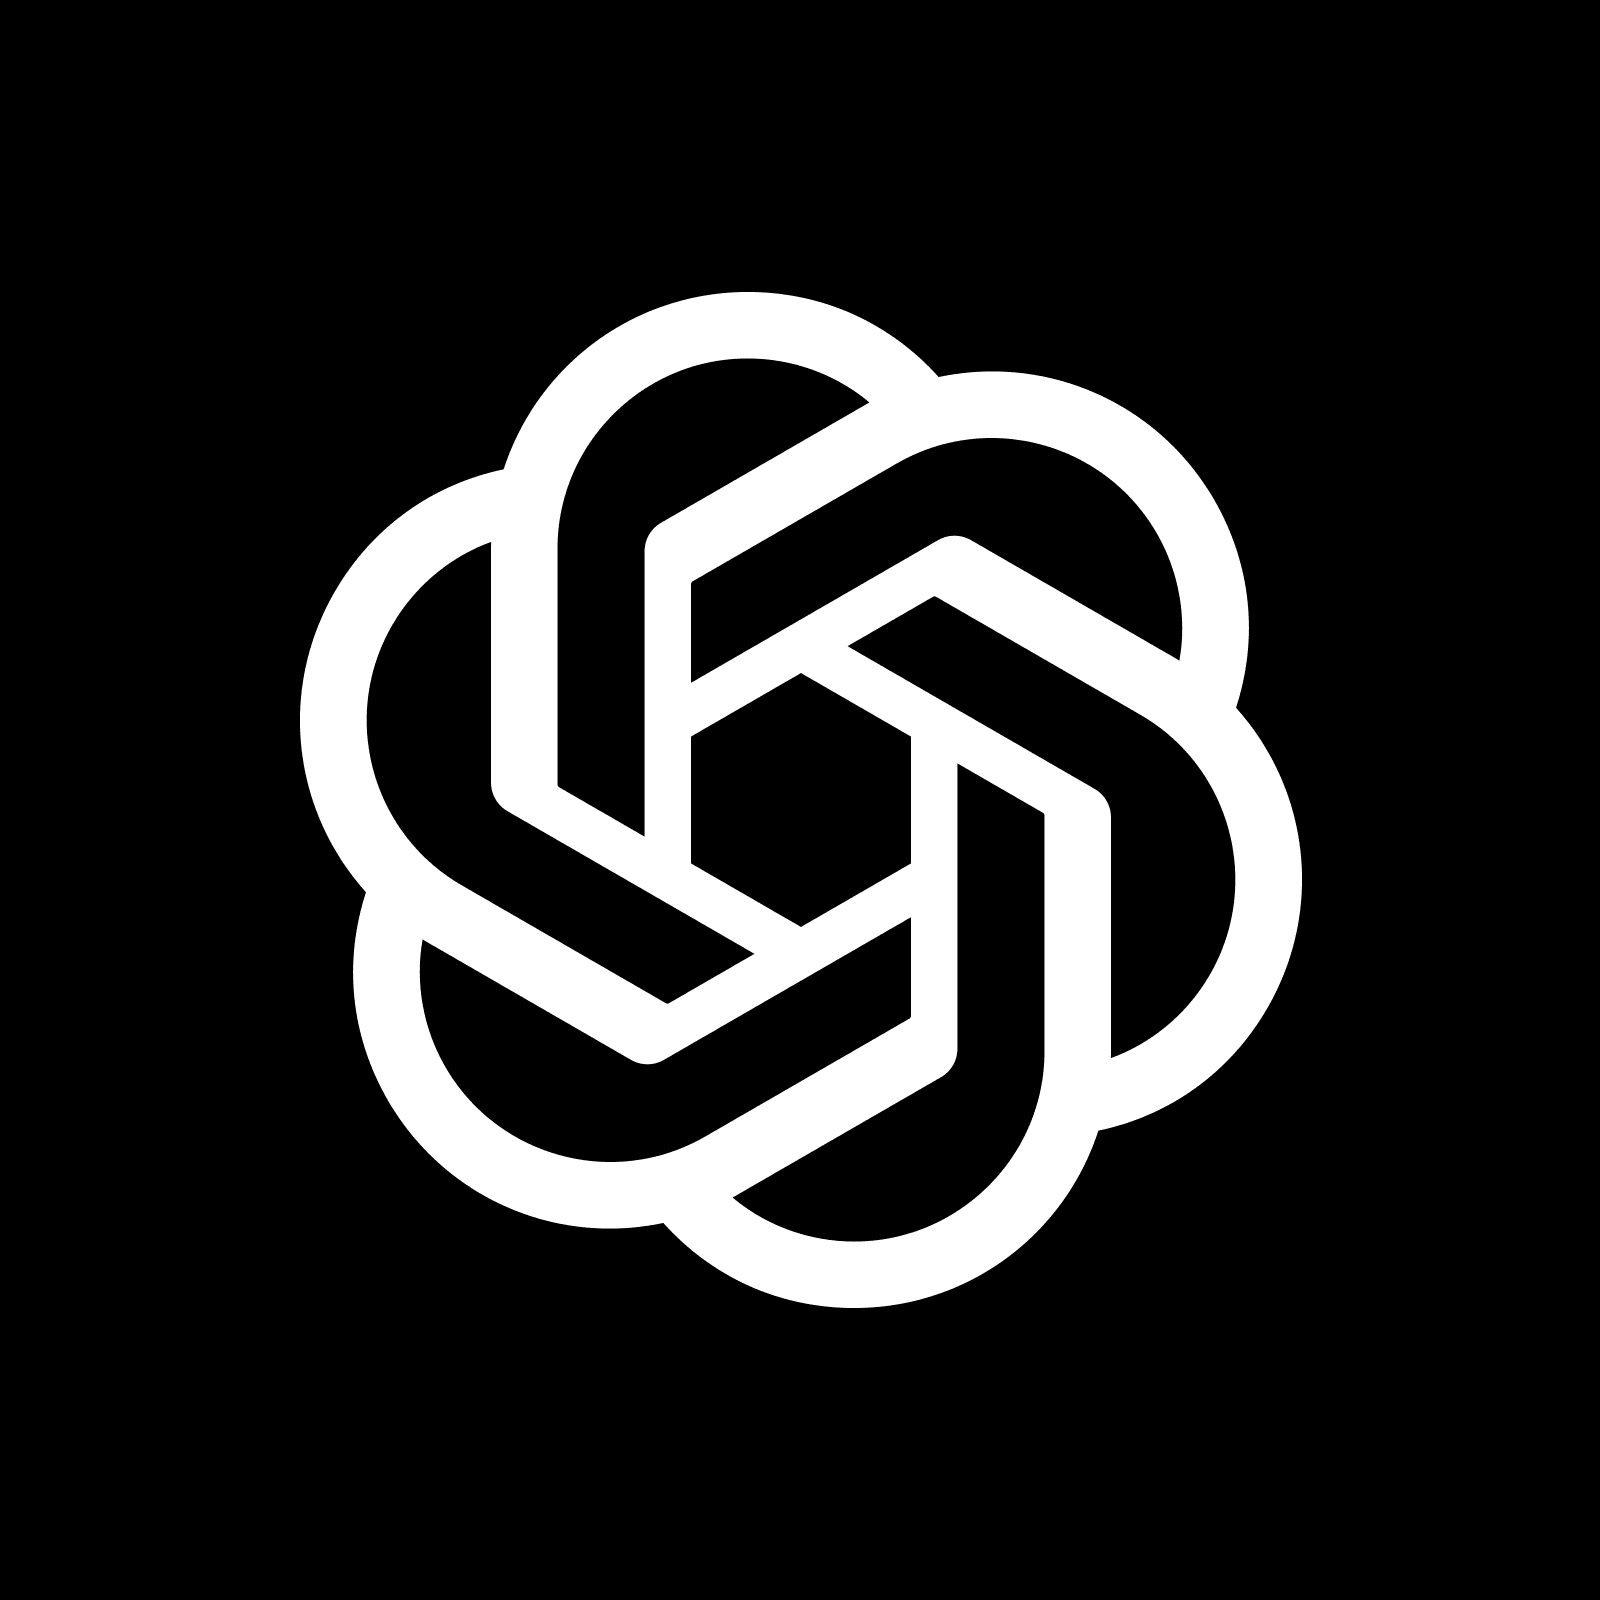 OpenAI logo icon, a graphical spiral resembling a flower in white line art against a black background. Logo